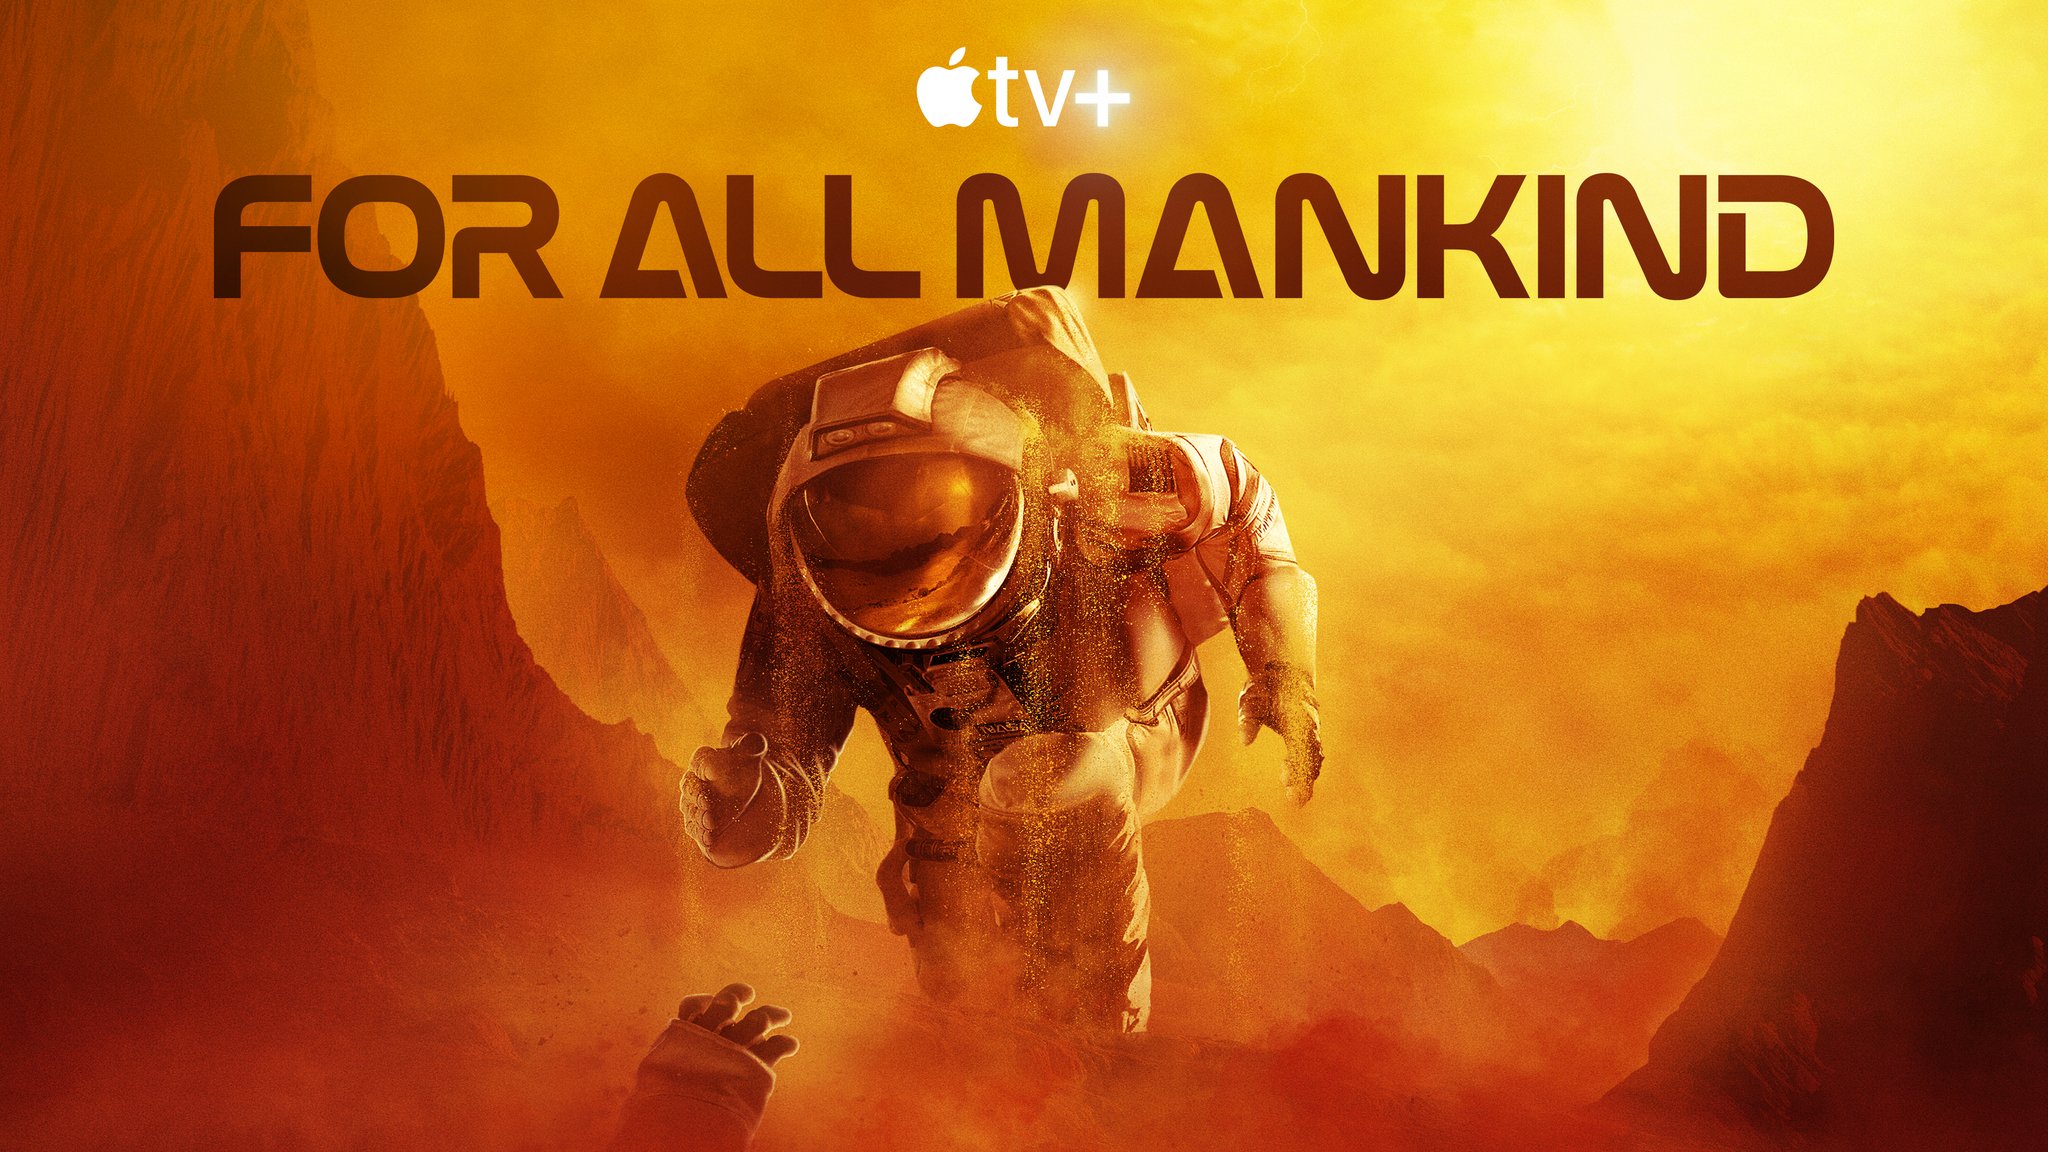 For All Mankind: Learn the mind-bending science behind the Apple TV+ show